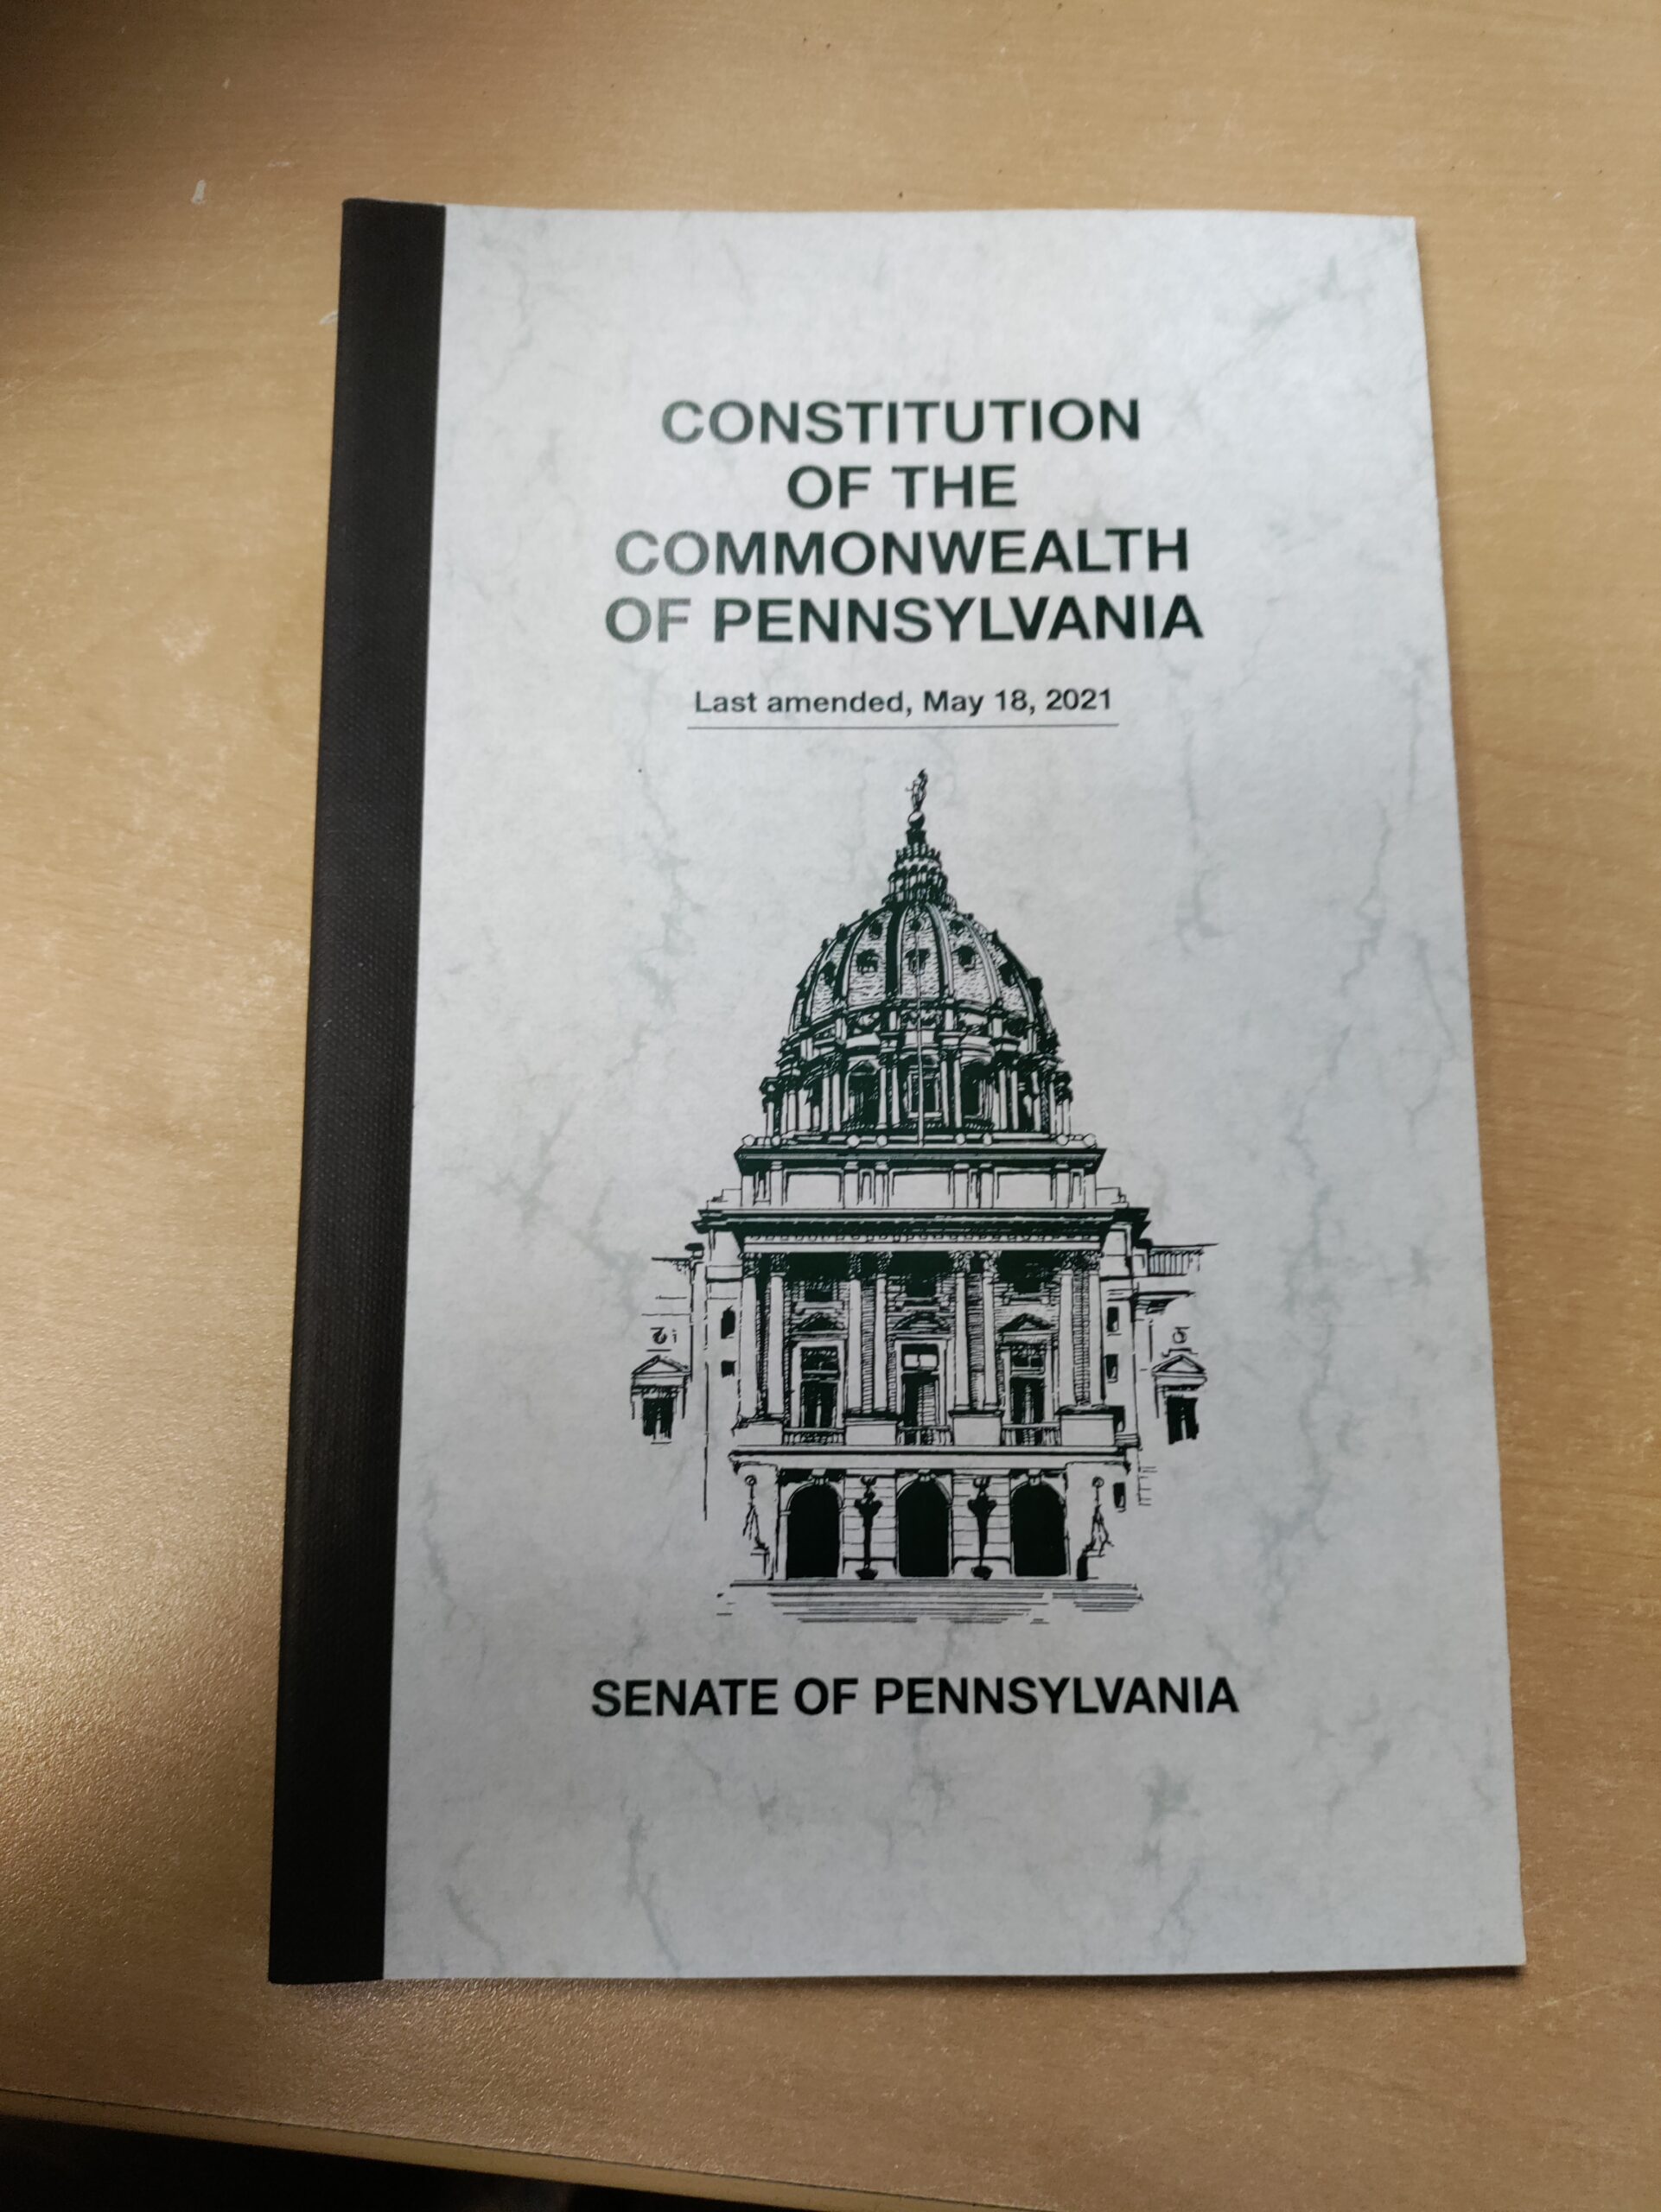 Action Alert – Prohibiting Non-Citizens from Voting in PA Elections